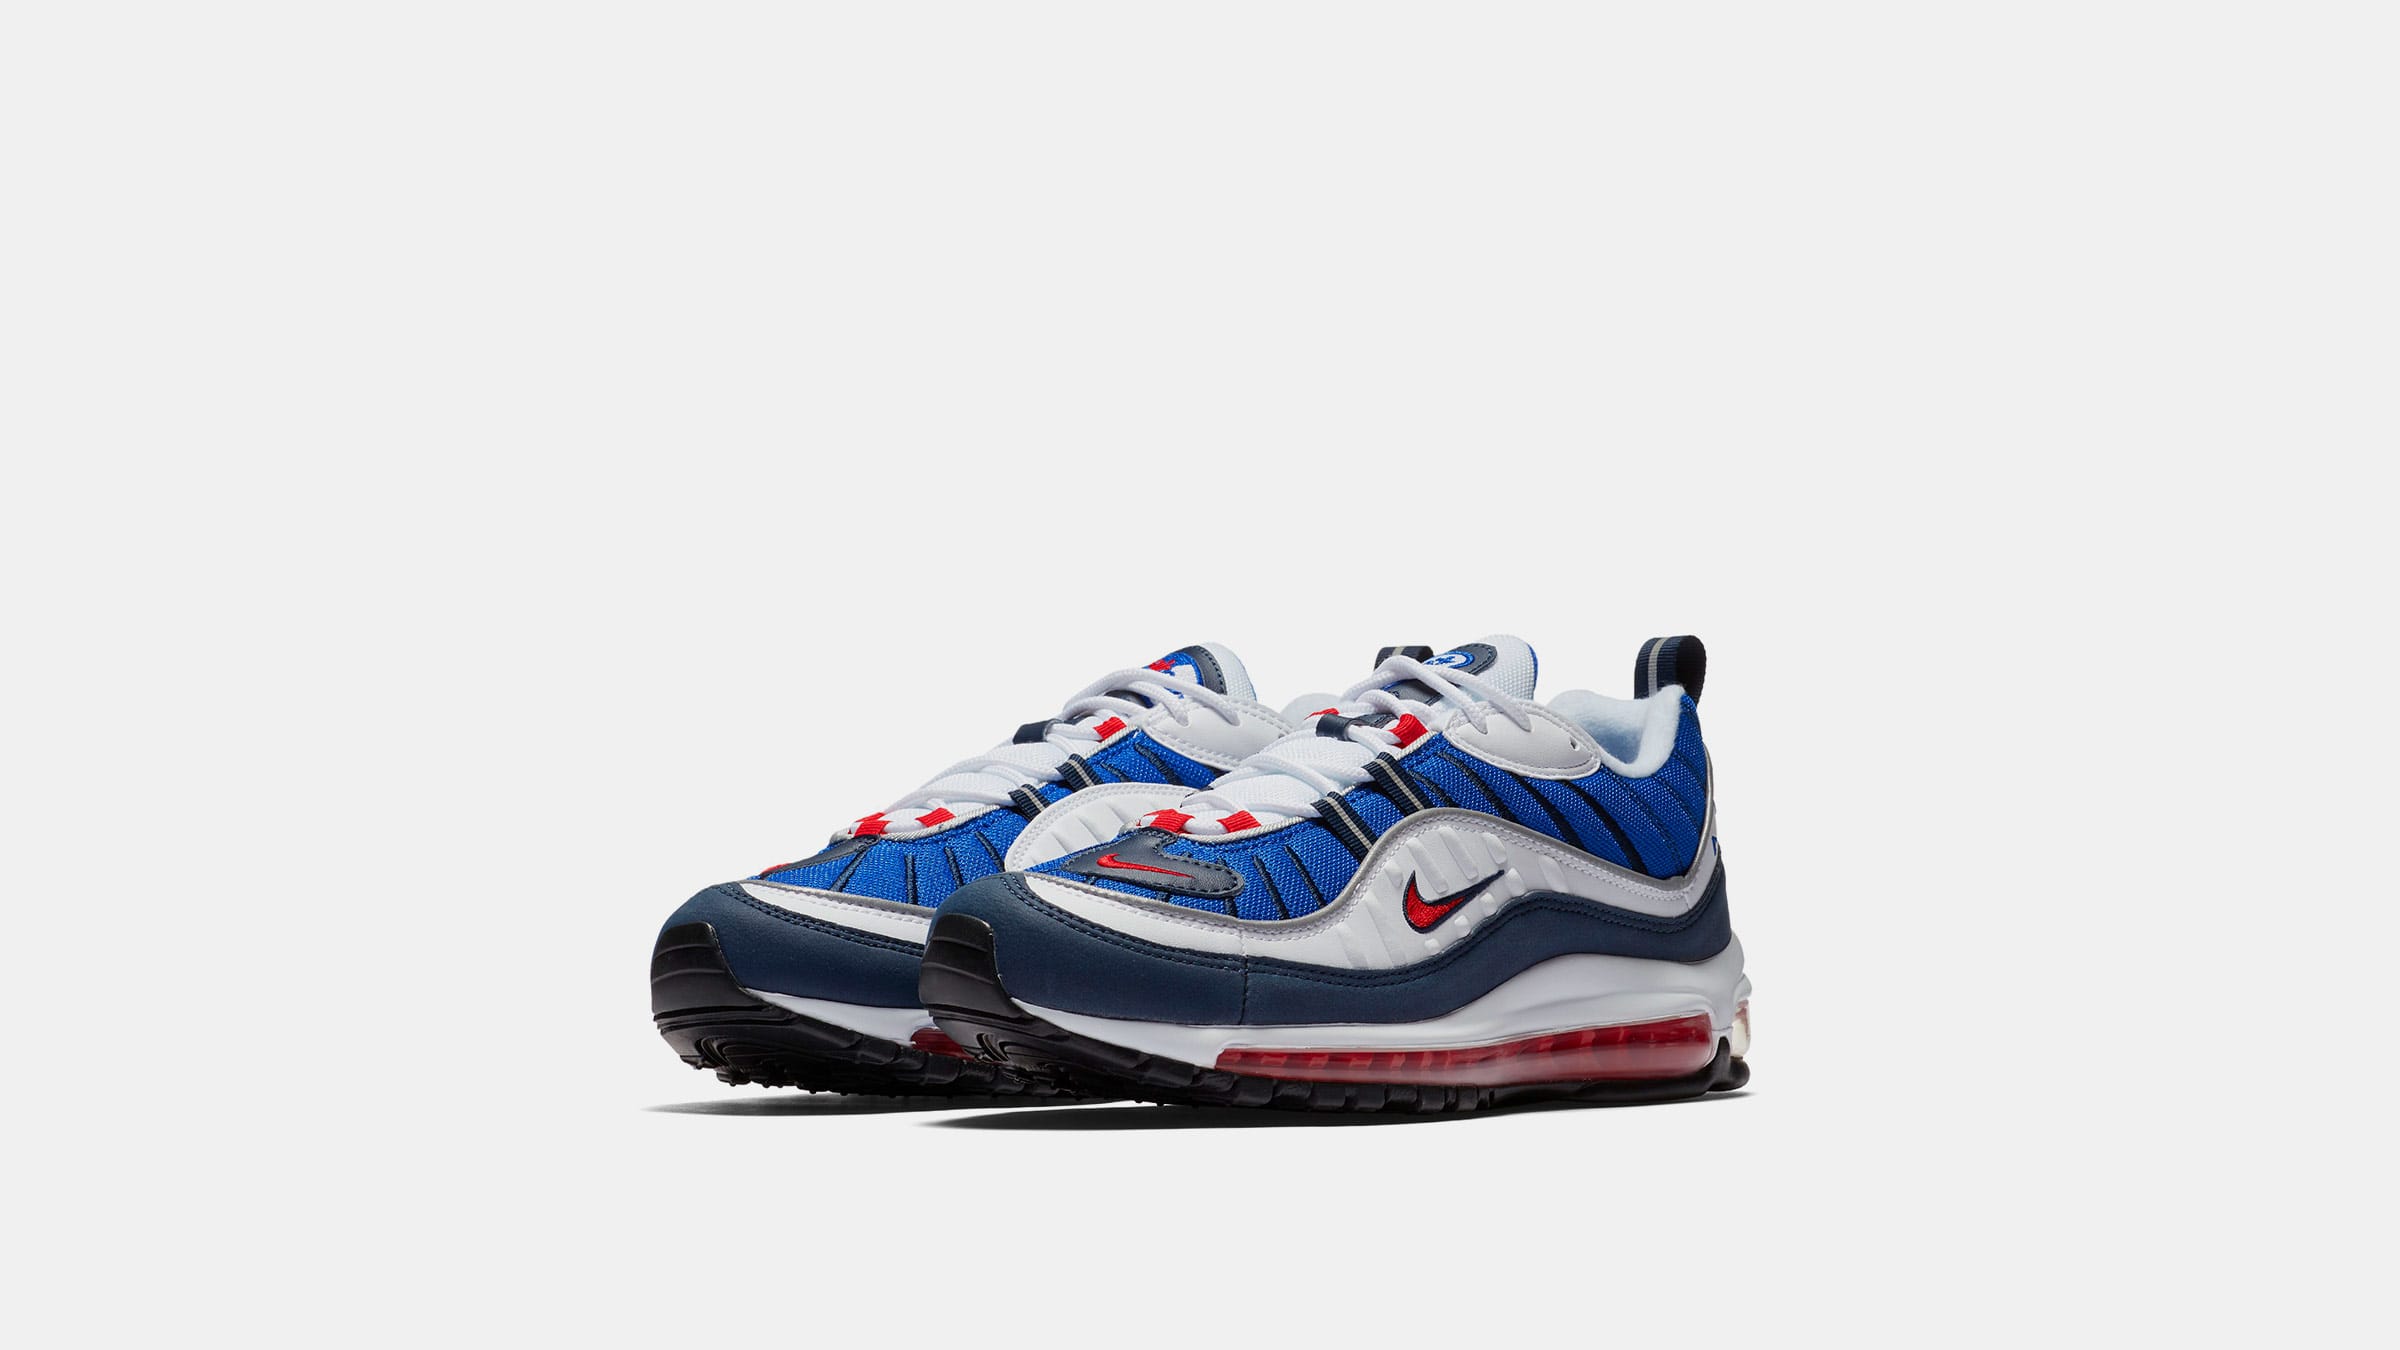 air max 98 red and blue